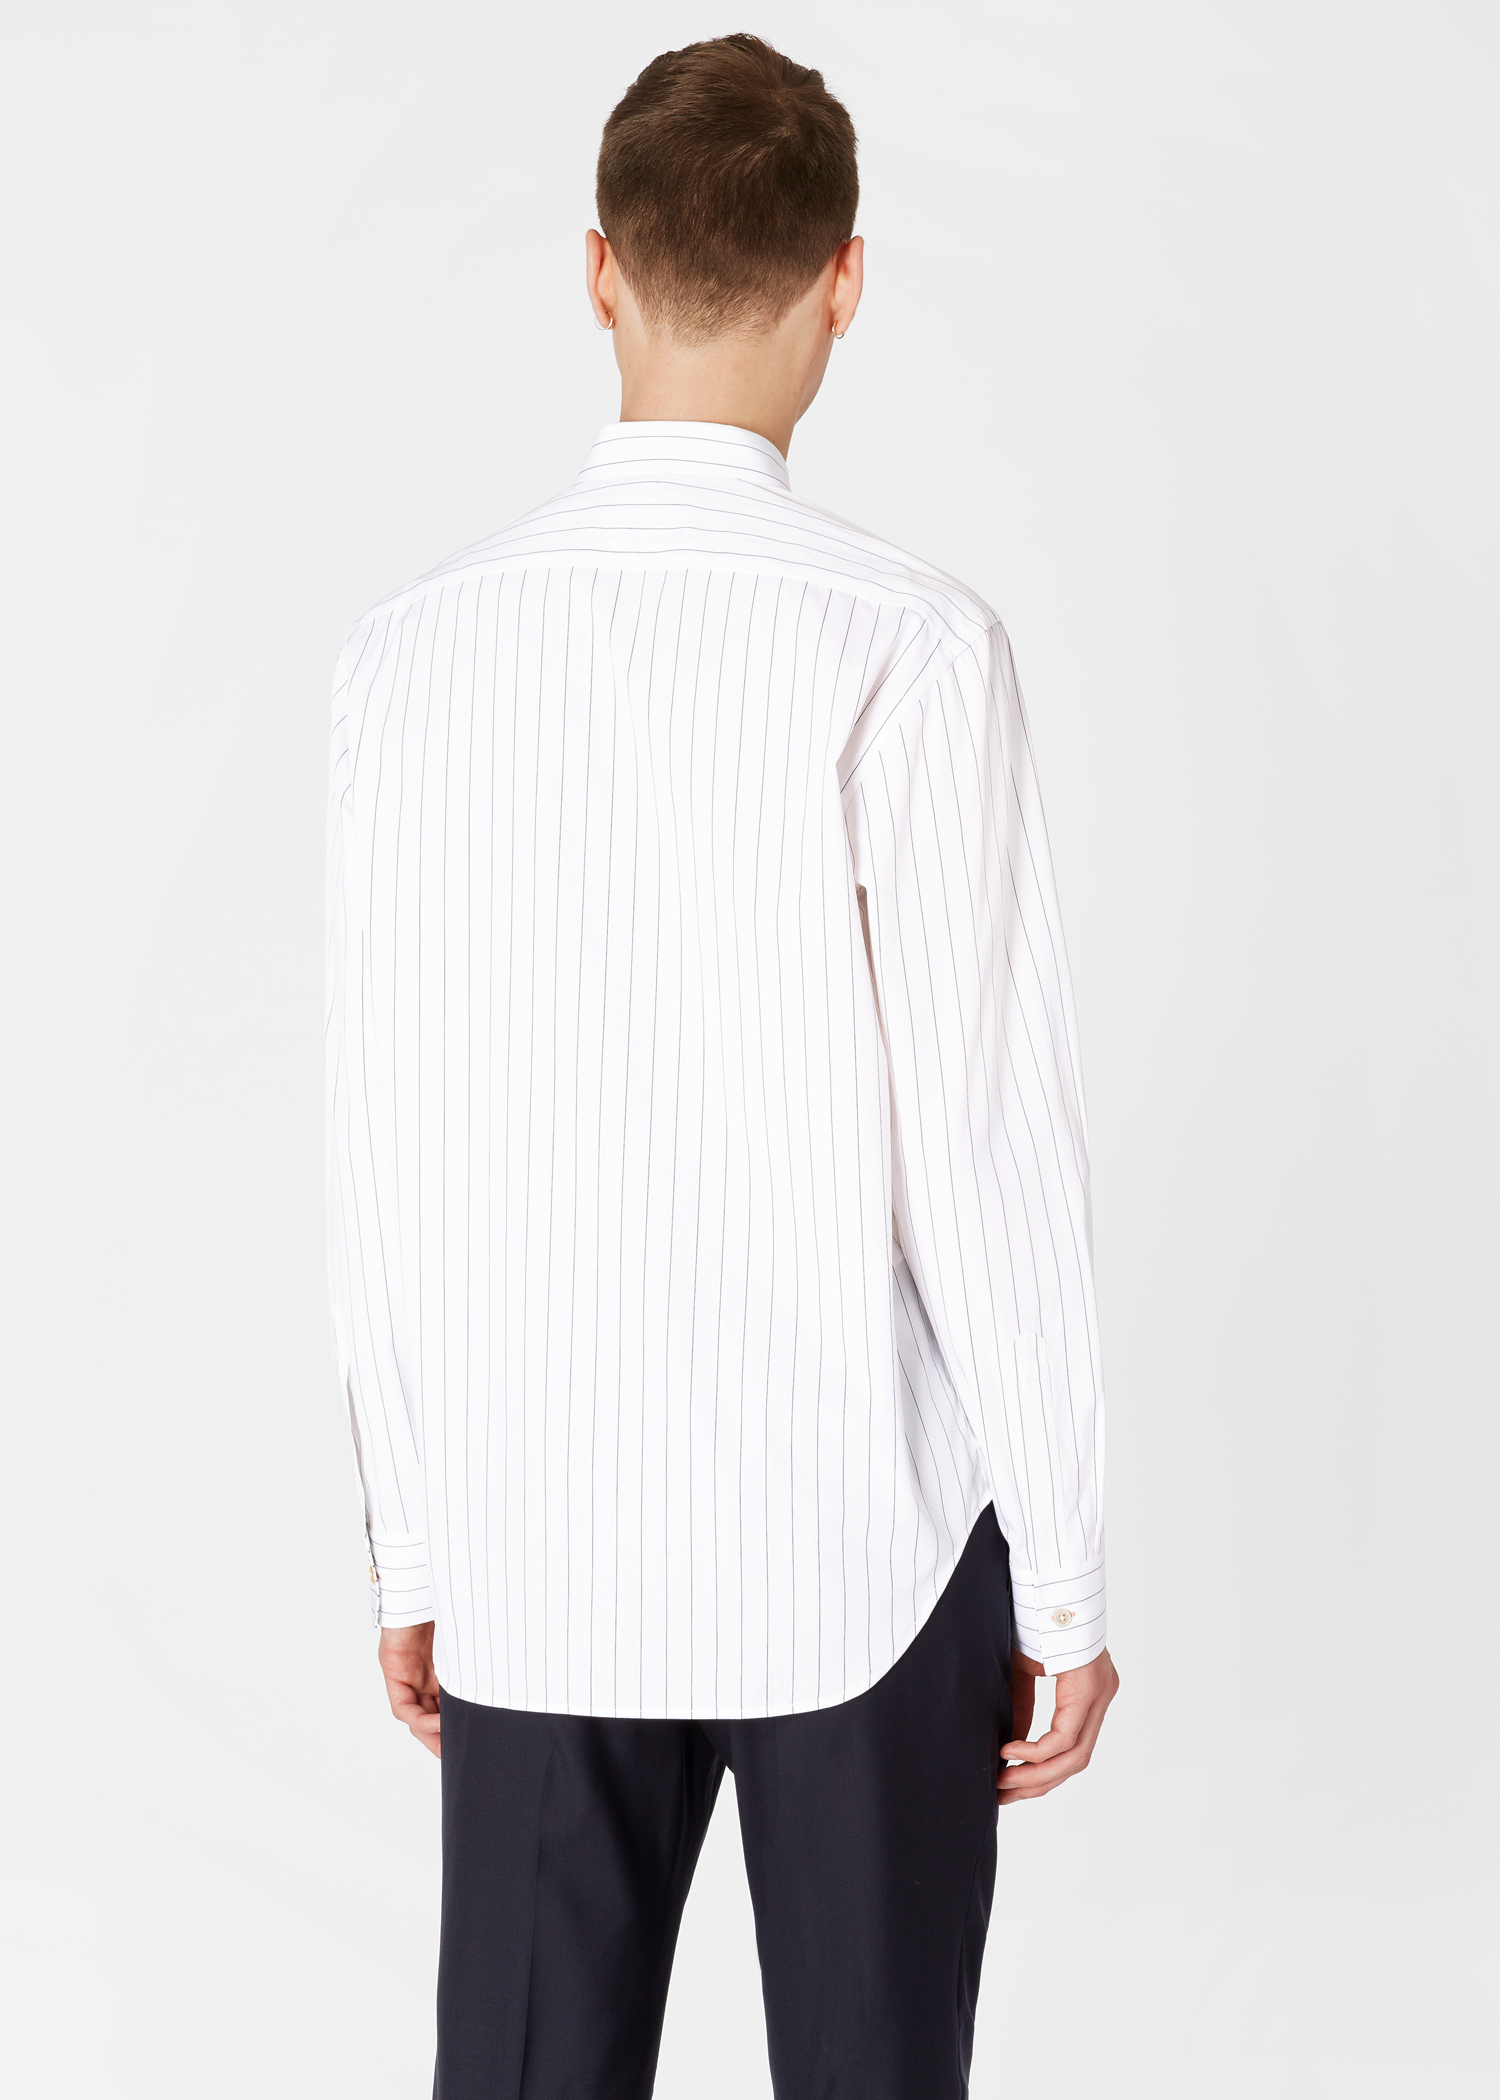 Model back close up - Men's Tailored-Fit Pin Stripe Cotton Shirt Paul Smith